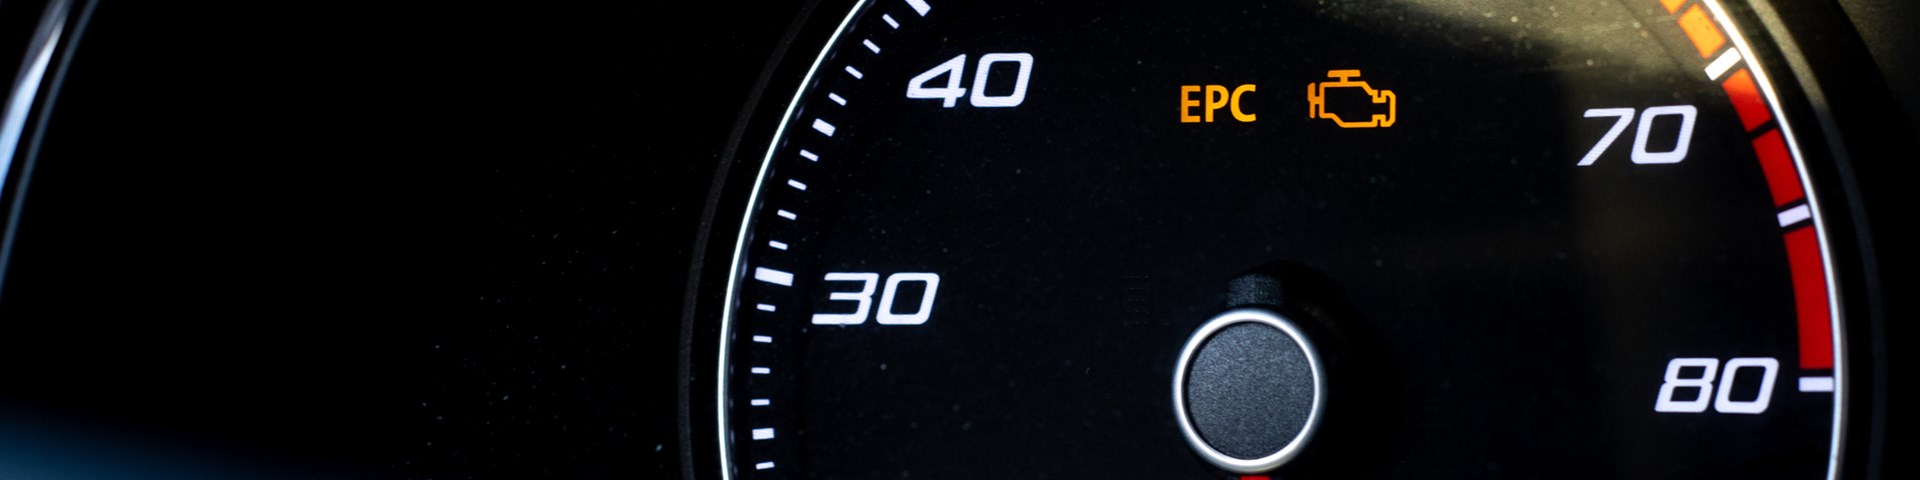 Clear image of vehicle dashboard showing warning lights